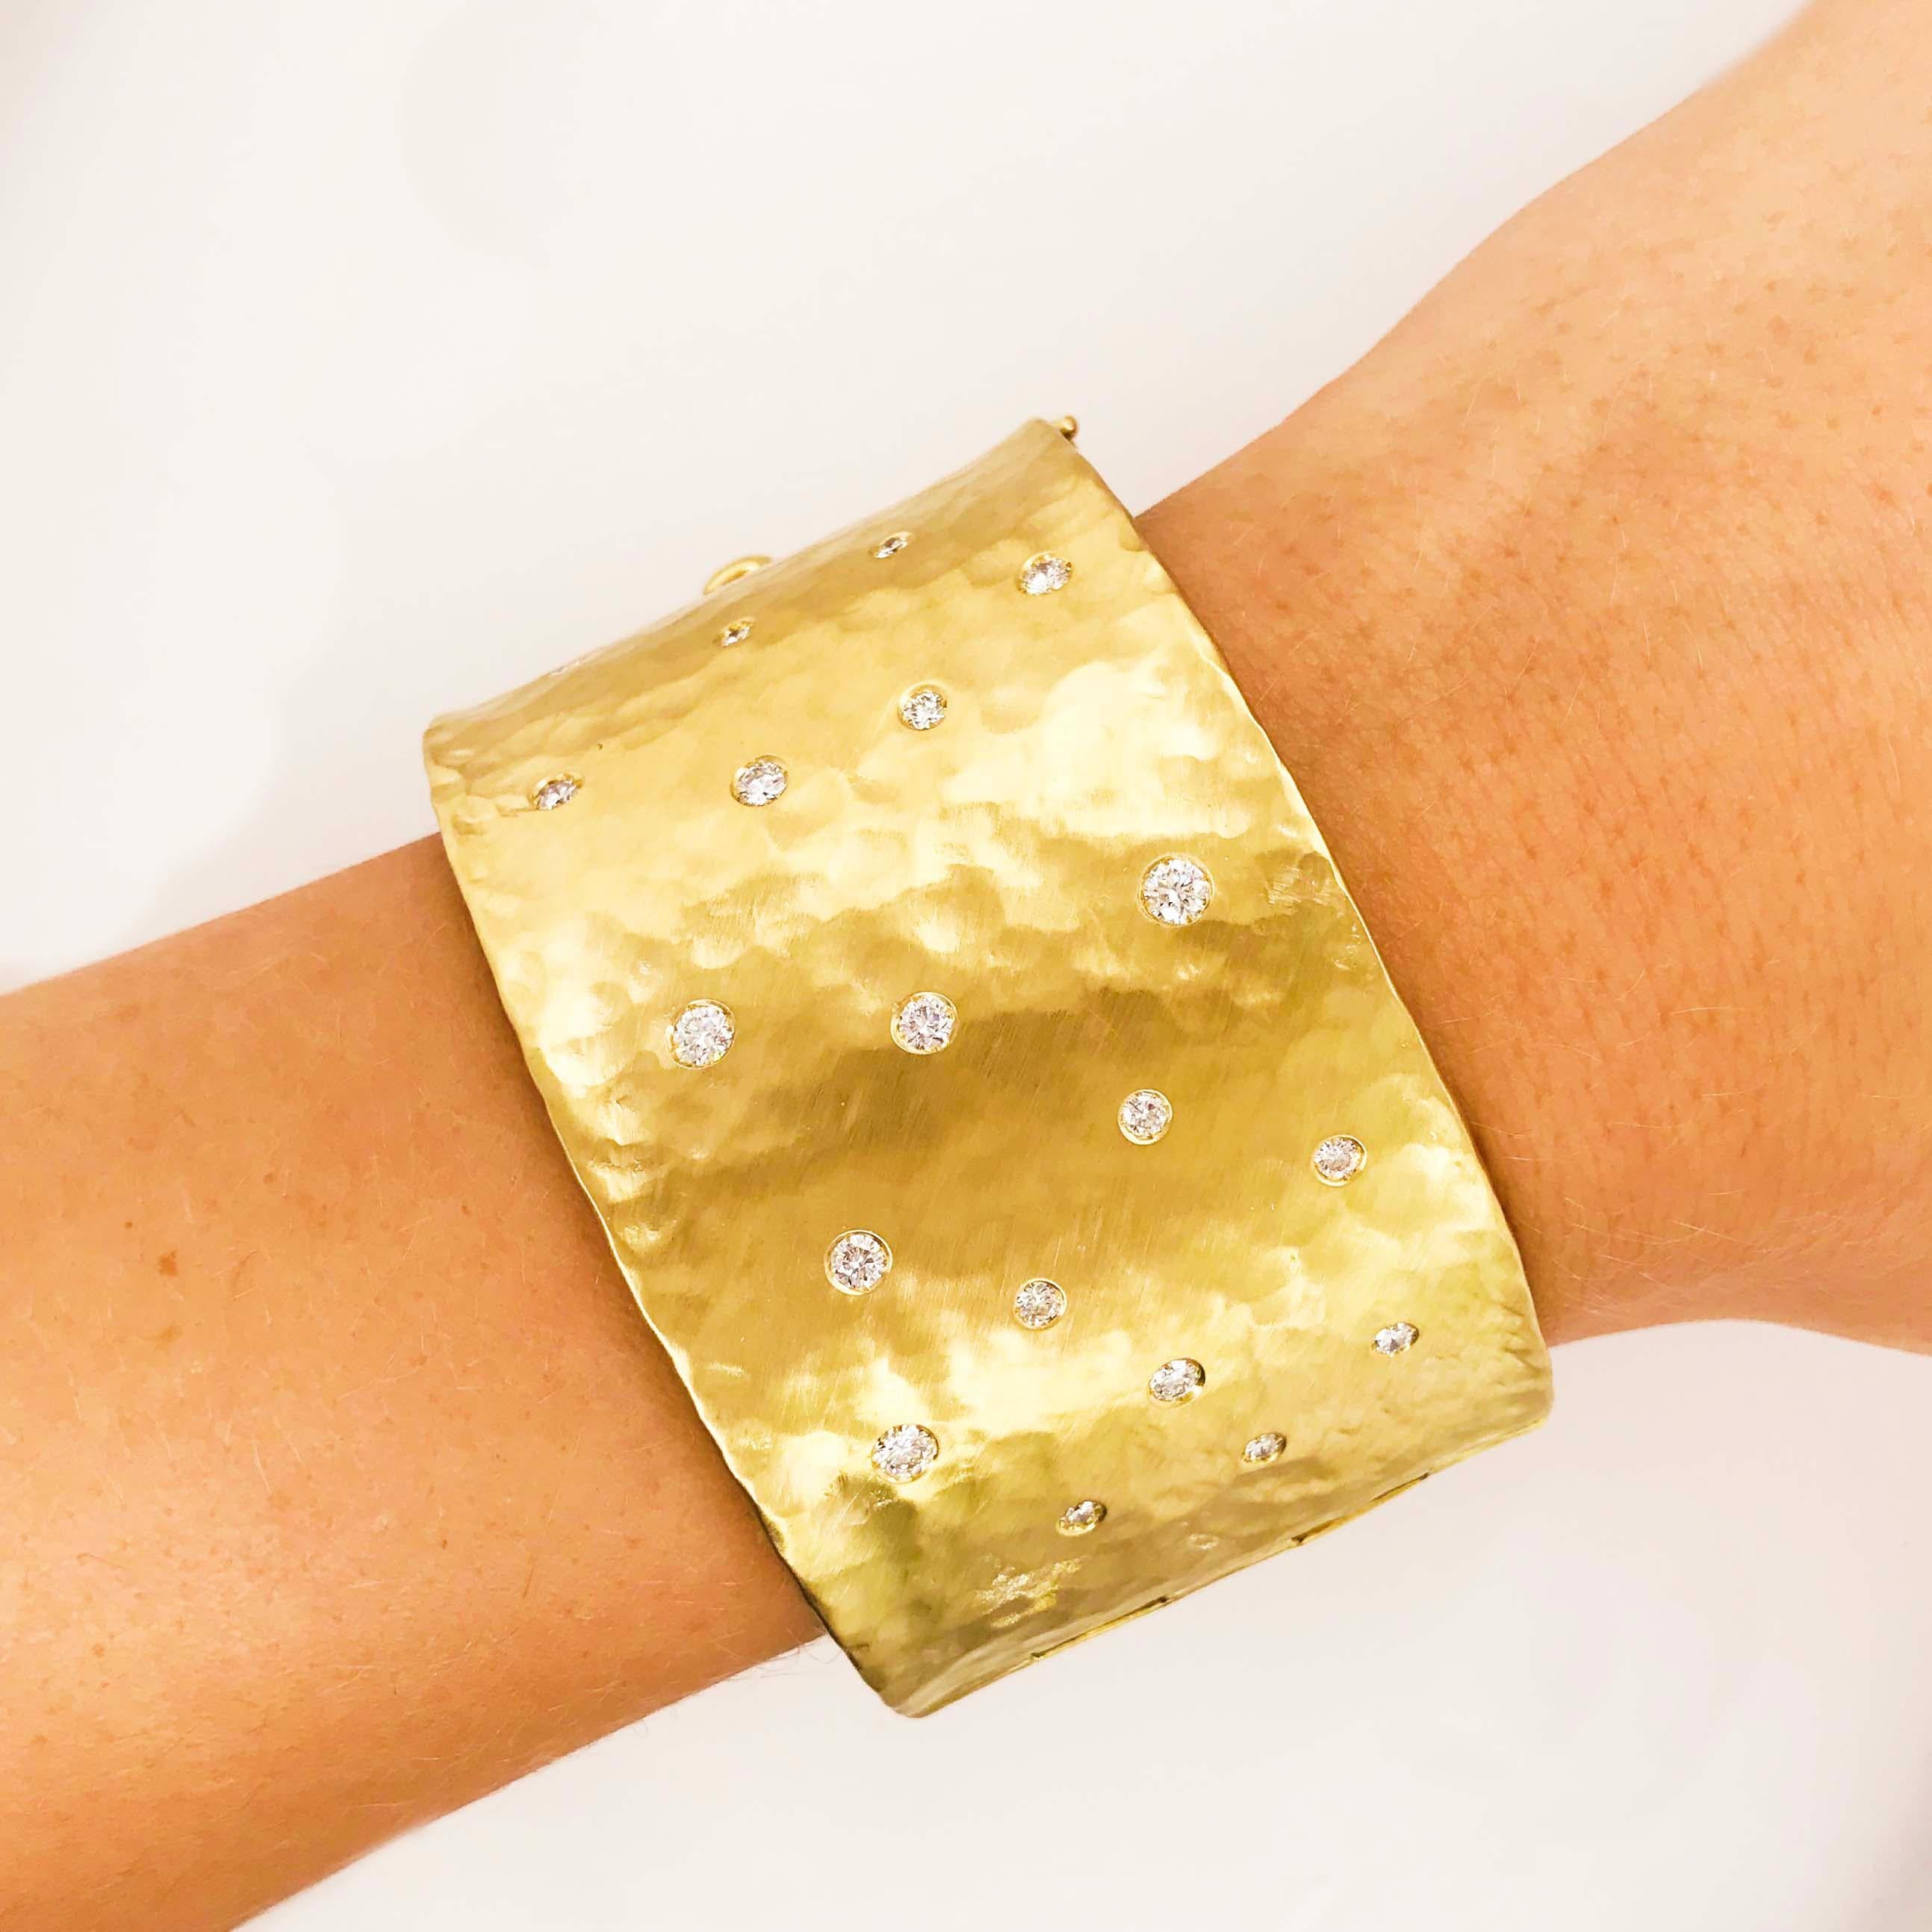 The gorgeous hammered finish and satin texture diamond cuff bracelet is a statement piece! The gold construction on this bracelet is so durable and sturdy!  With natural, genuine round brilliant diamonds that are gypsy set in an organic pattern on